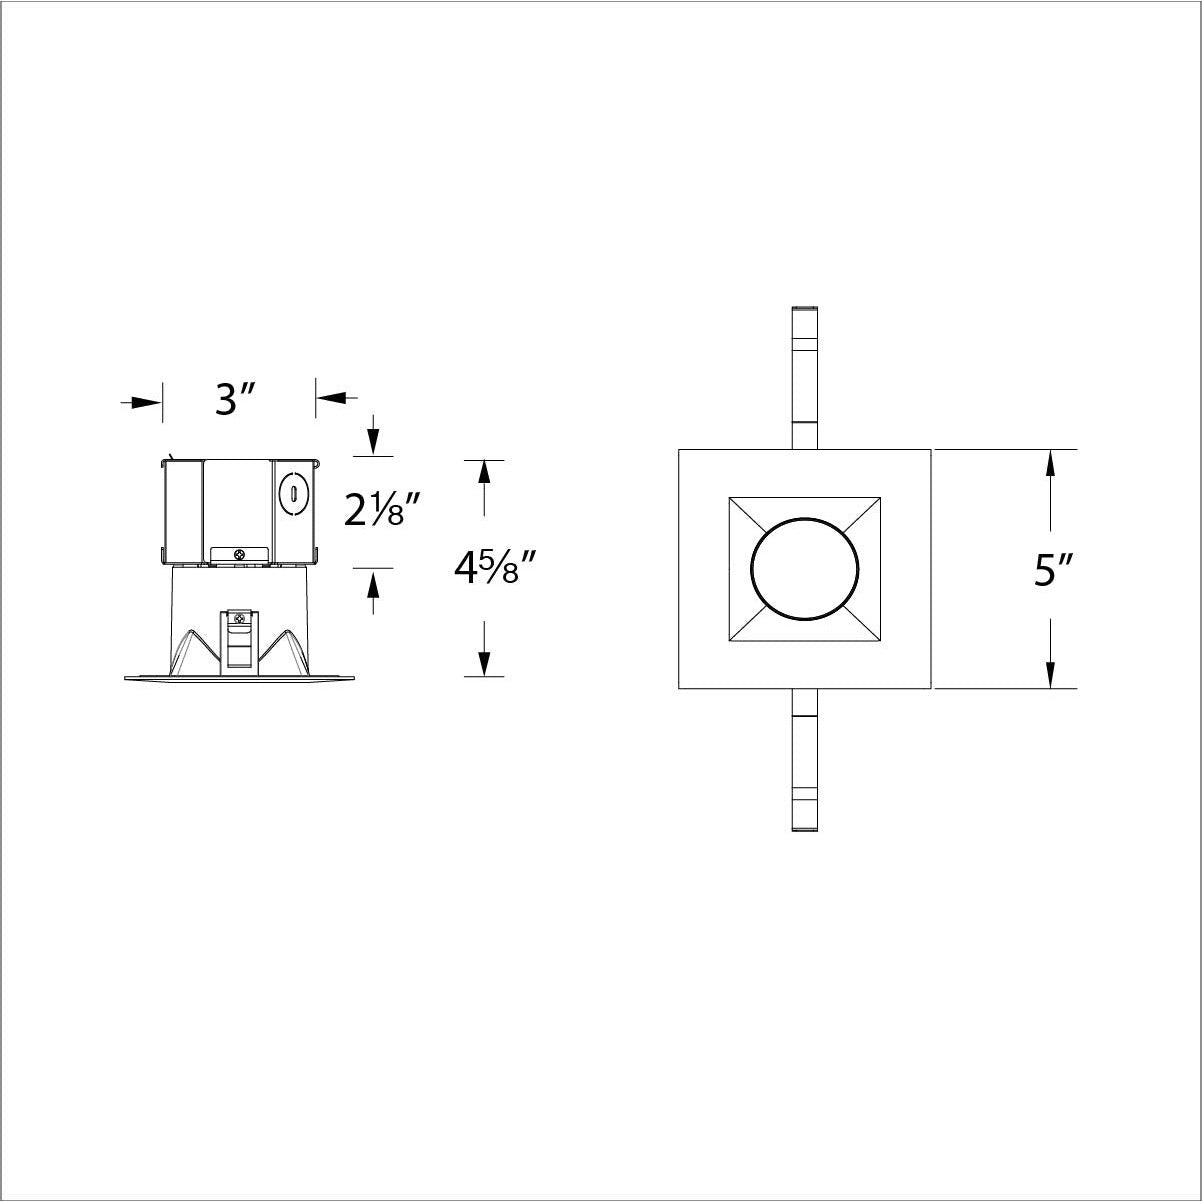 Pop-in 4" LED Square Recessed Kit 5-CCT Selectable